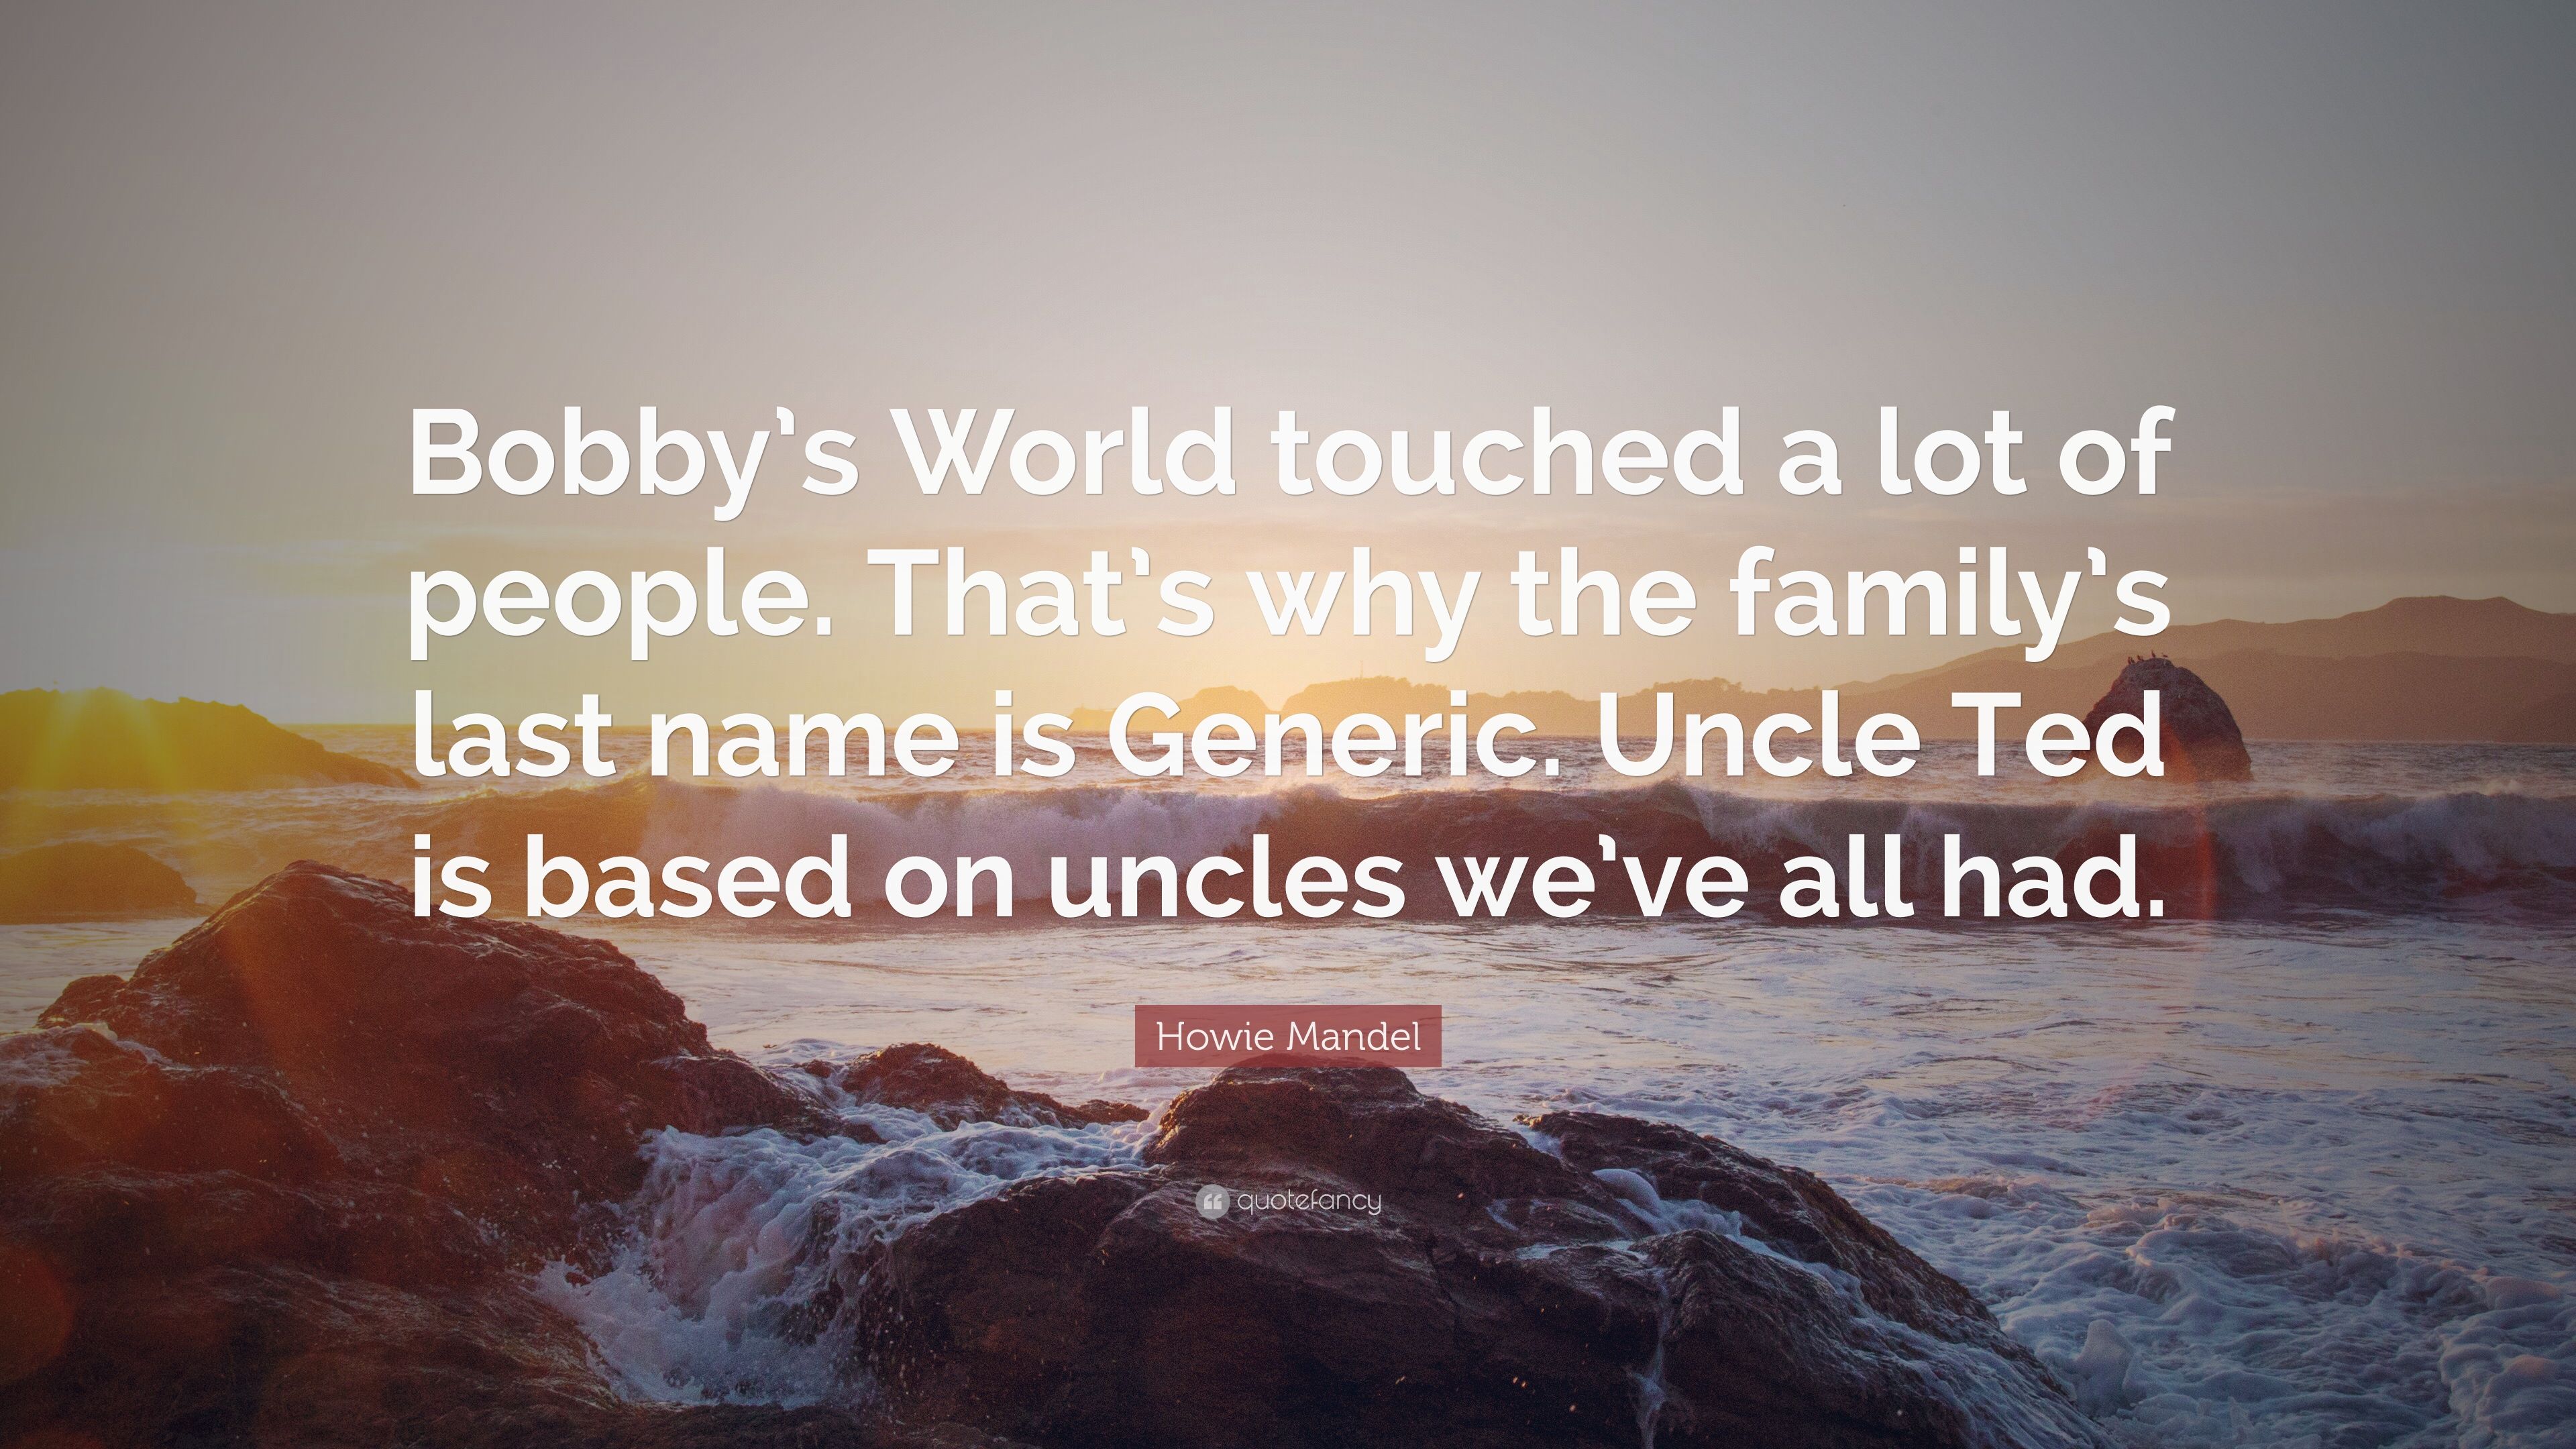 Howie Mandel Quote: “Bobby's World touched a lot of people. That's why the family's last name is Generic. Uncle Ted is based on uncles we've .”